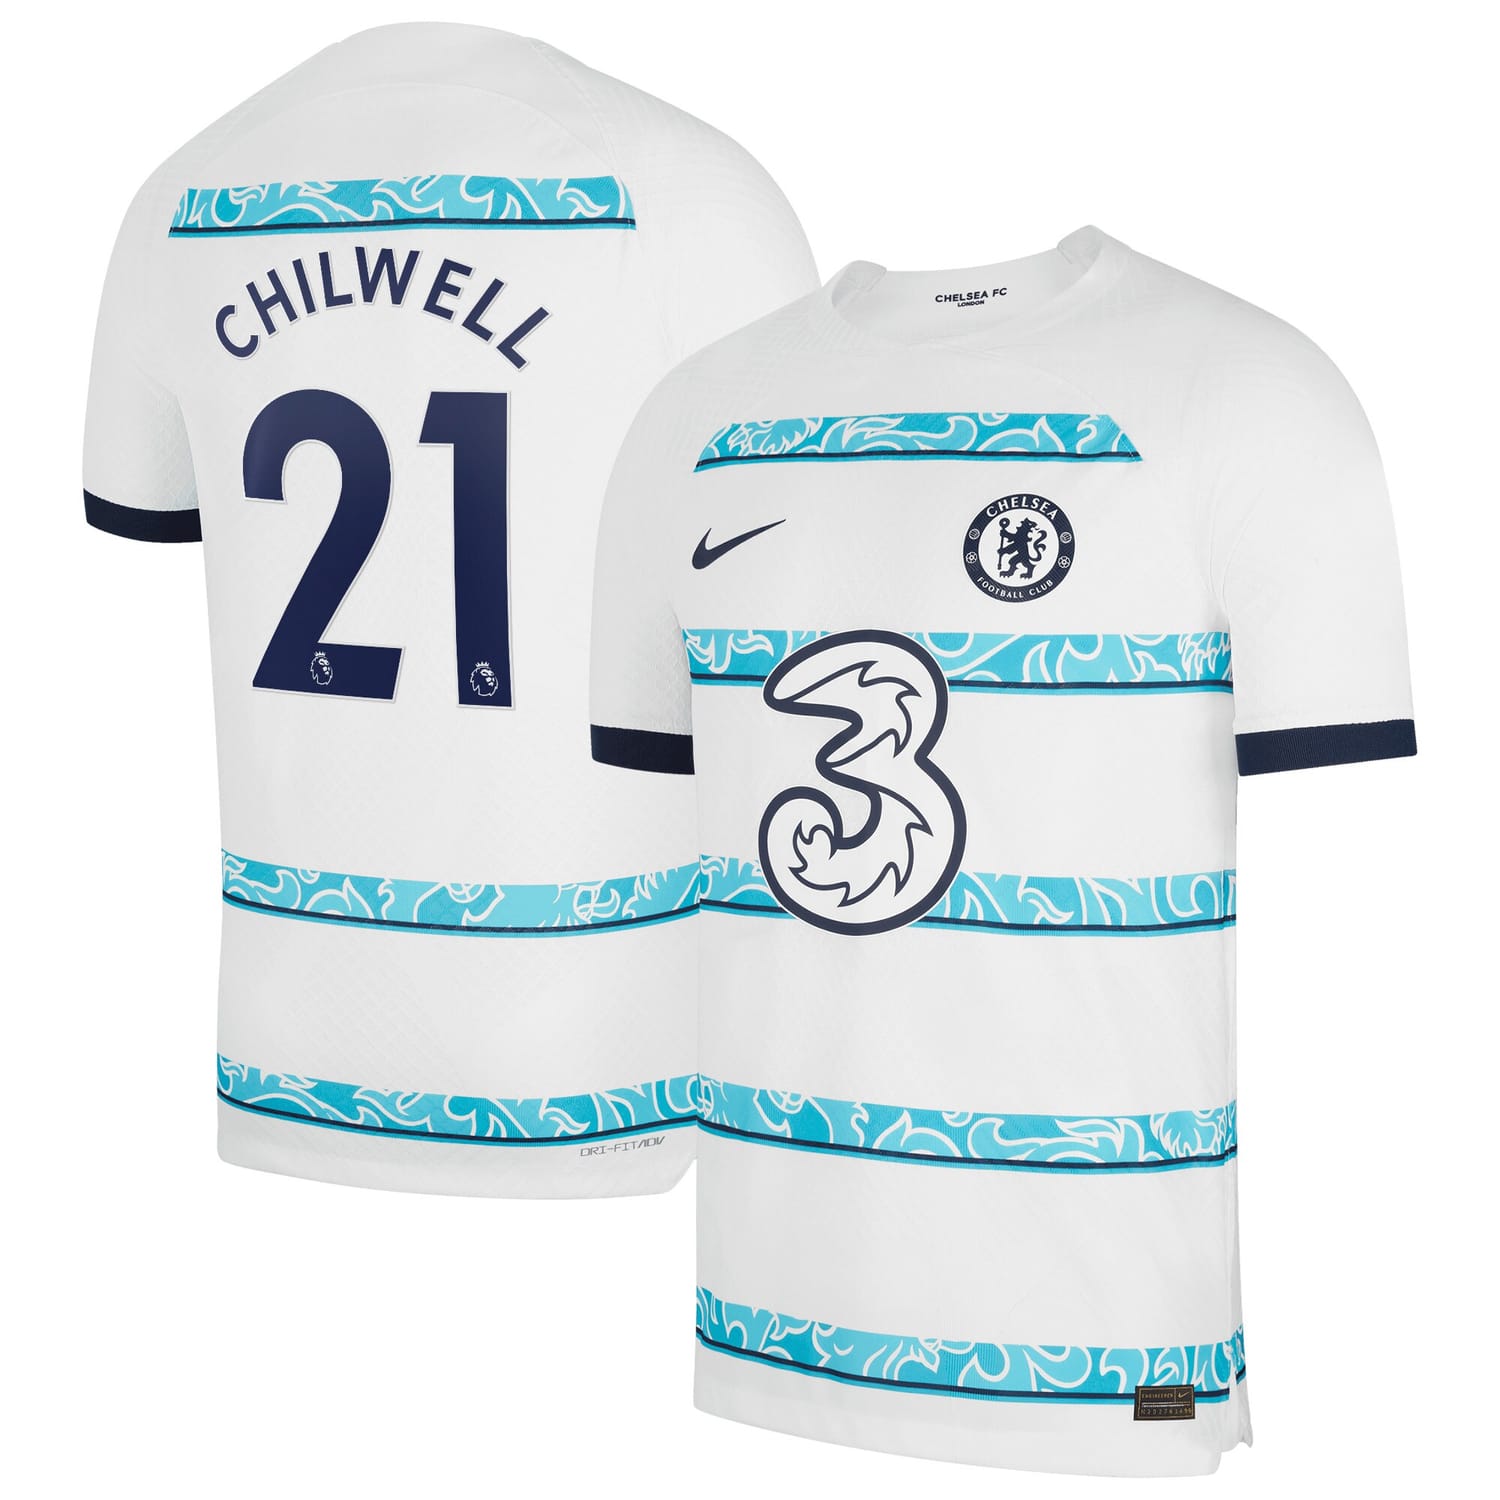 Premier League Chelsea Away Authentic Jersey Shirt 2022-23 player Ben Chilwell 21 printing for Men